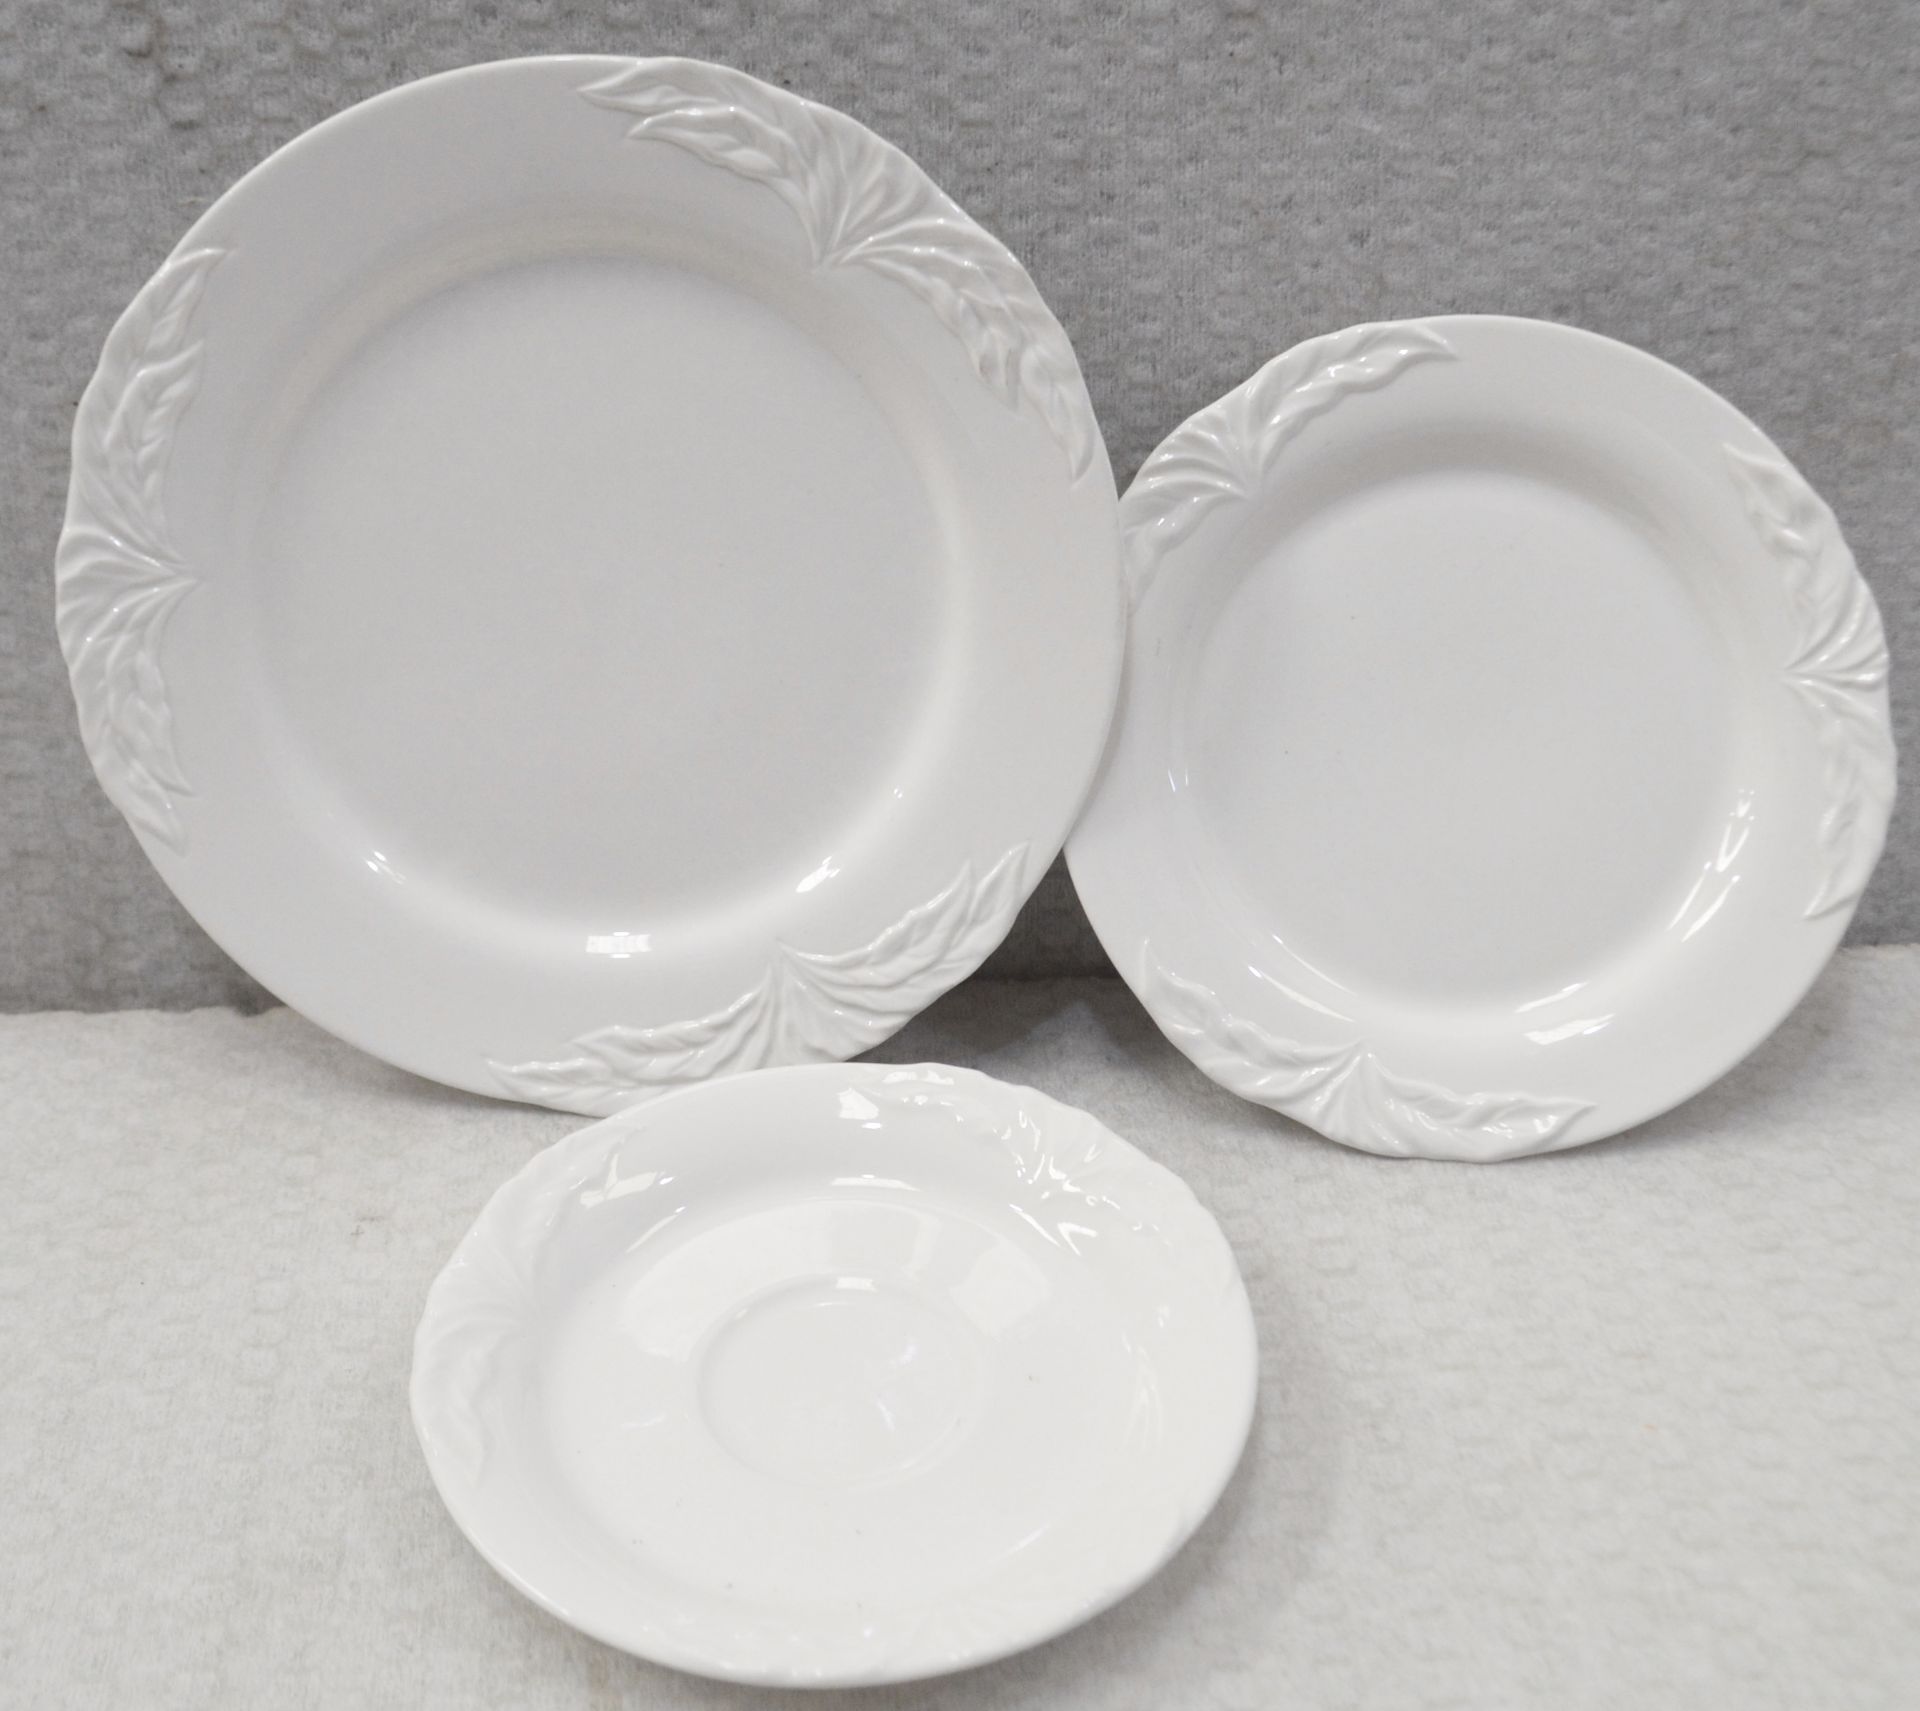 1 x Assorted Collection of Fourteen Villeroy & Boch Foglia Tea/Side/Bread & Butter Plates - Image 2 of 3